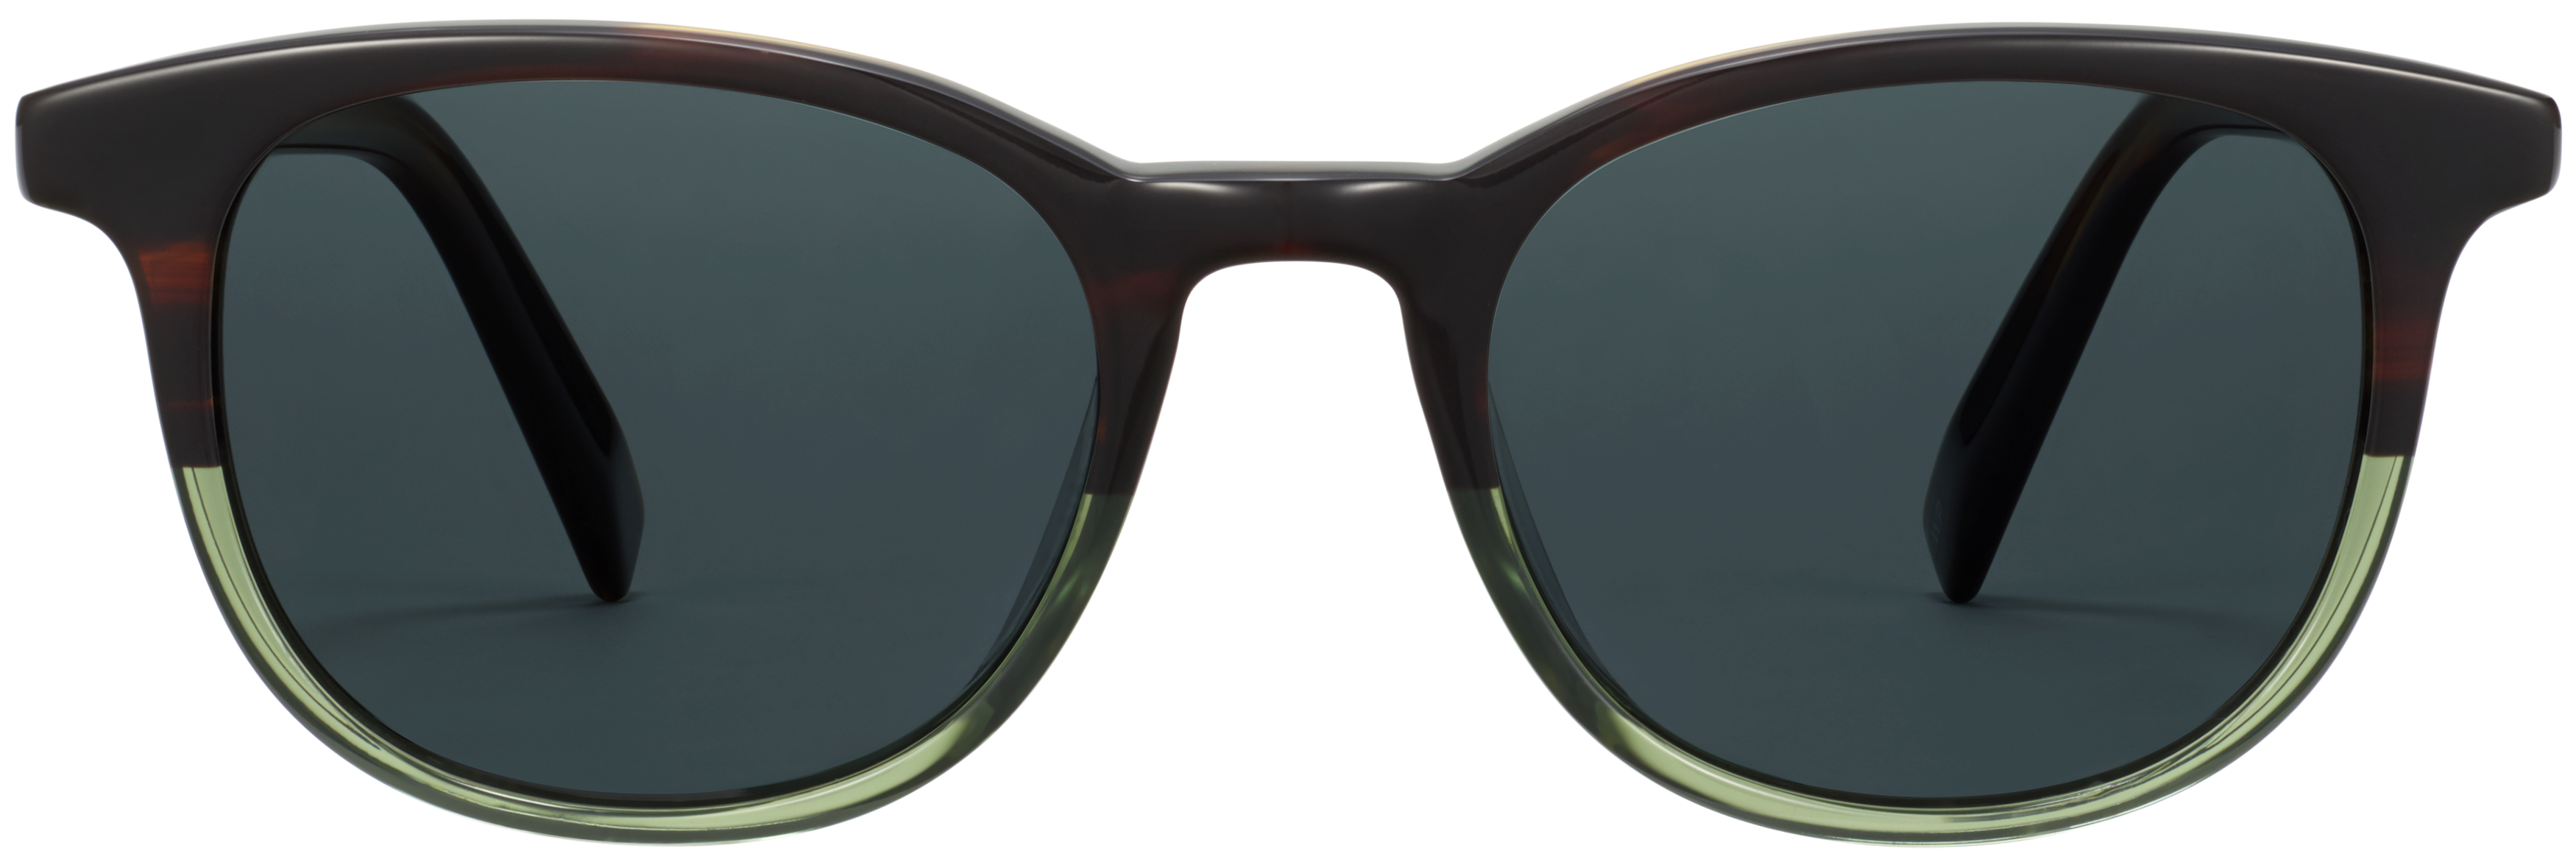 Durand Sunglasses in Crystal | Warby Parker